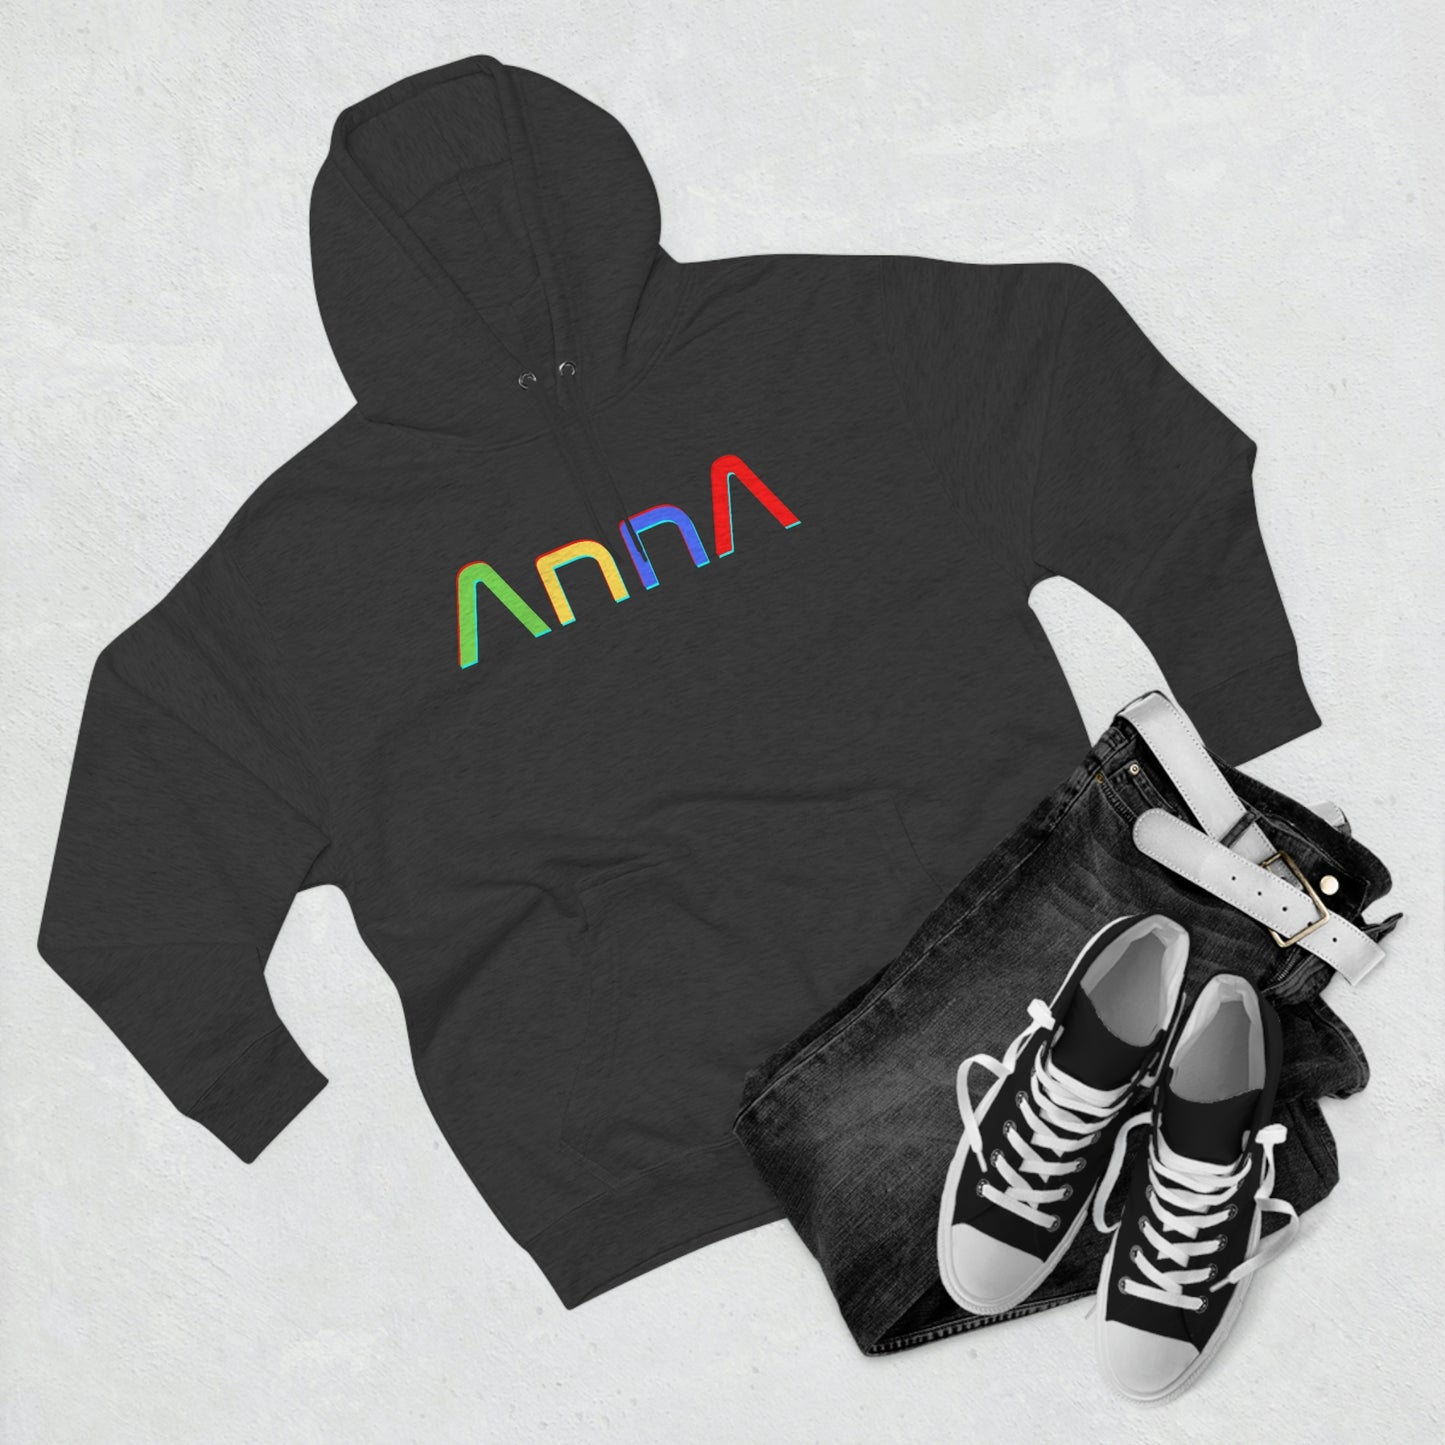 Copy of Chef Anna Hoodie